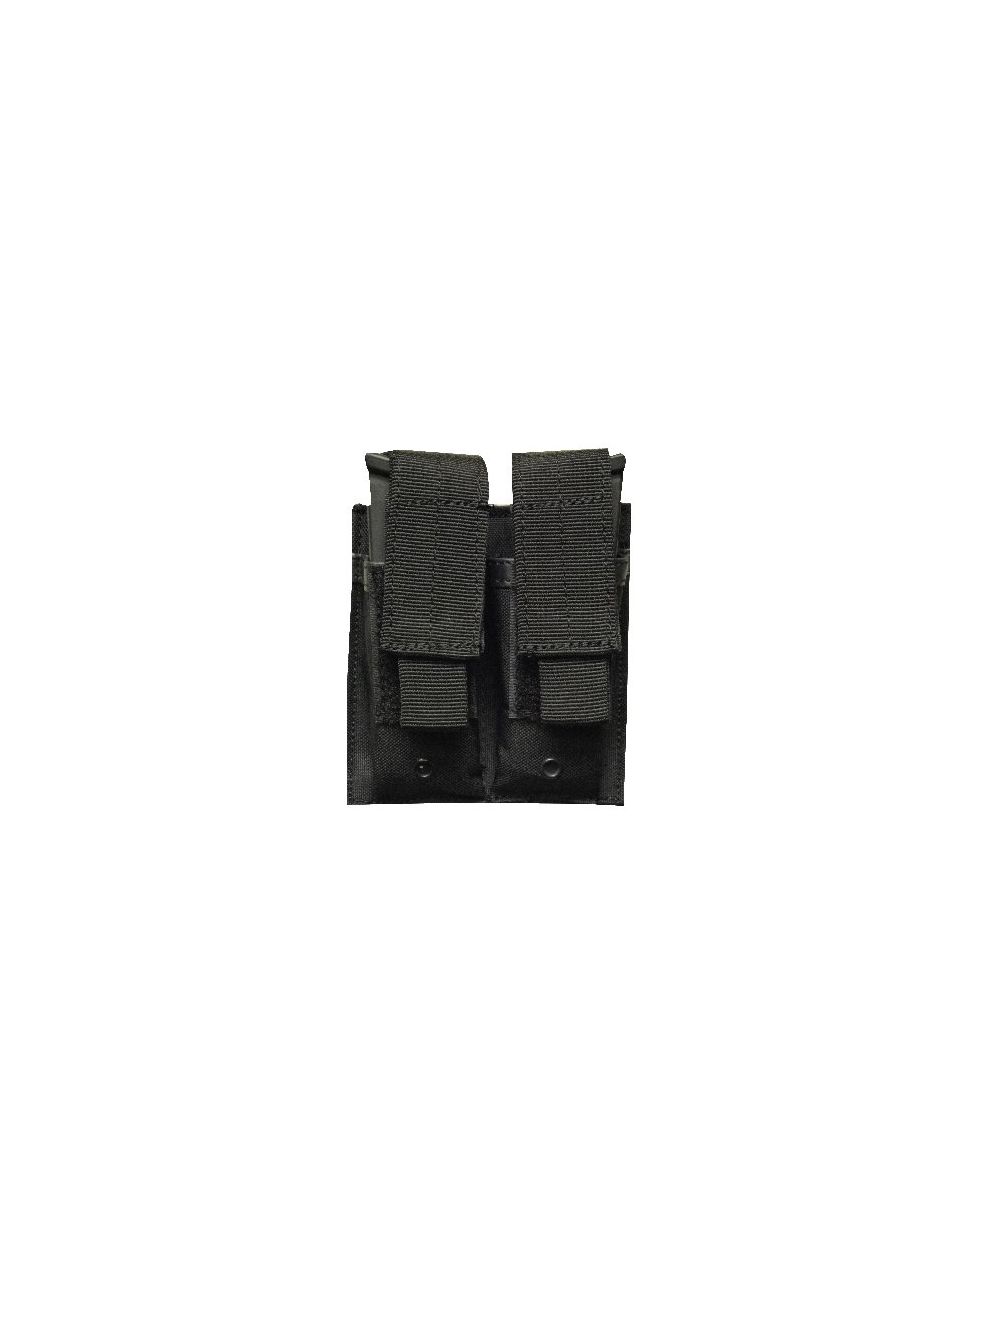 ARDP-5S M14/M16 Double Mag Pouch